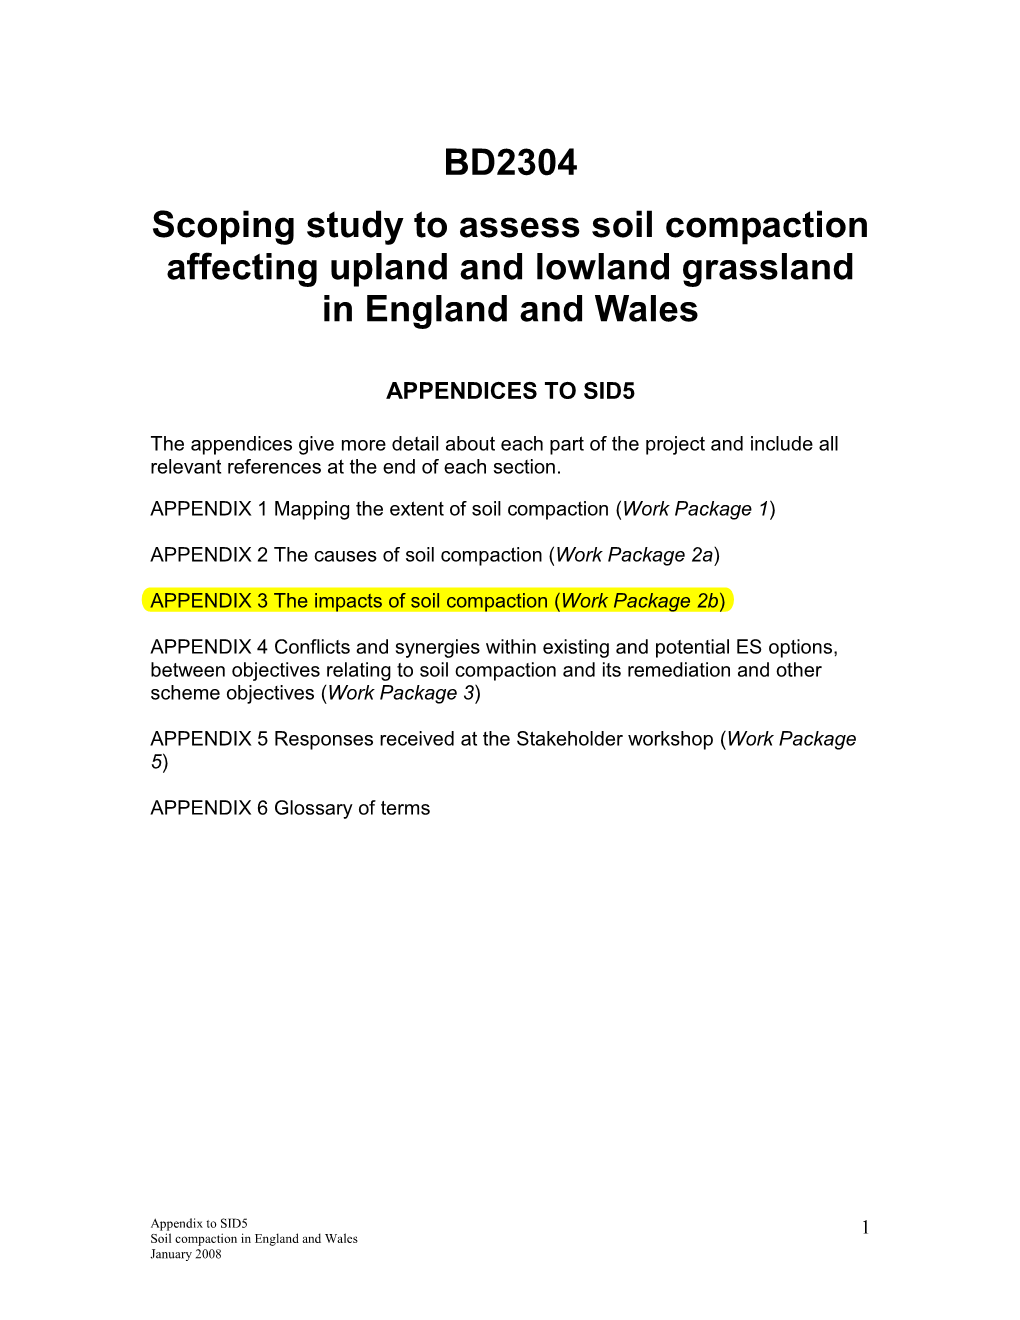 BD2304 Scoping Study to Assess Soil Compaction Affecting Upland and Lowland Grassland in England and Wales